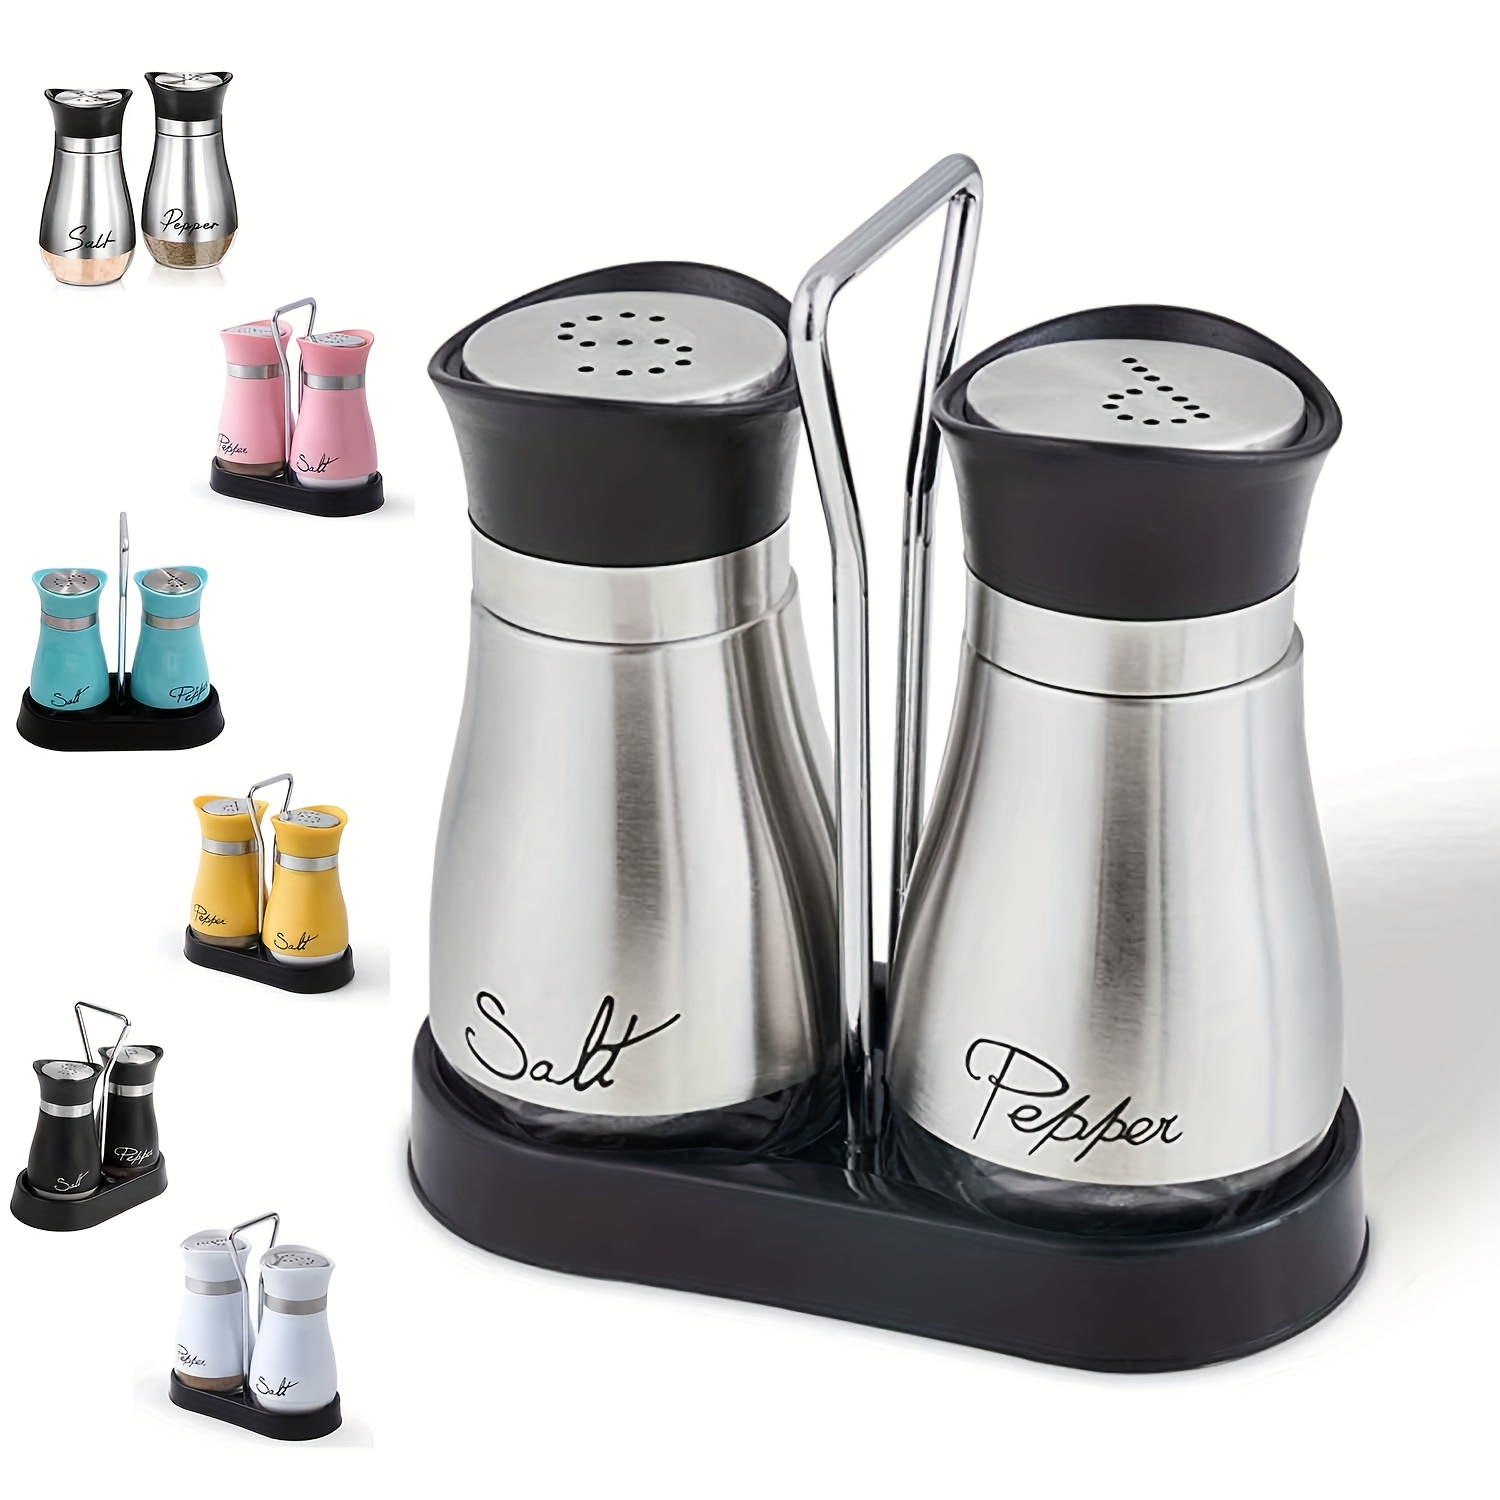 Salt and Pepper Shakers - Spice Dispenser with Adjustable Pour Holes - Stainless Steel & Glass - by Smart House Inc (2, Black)